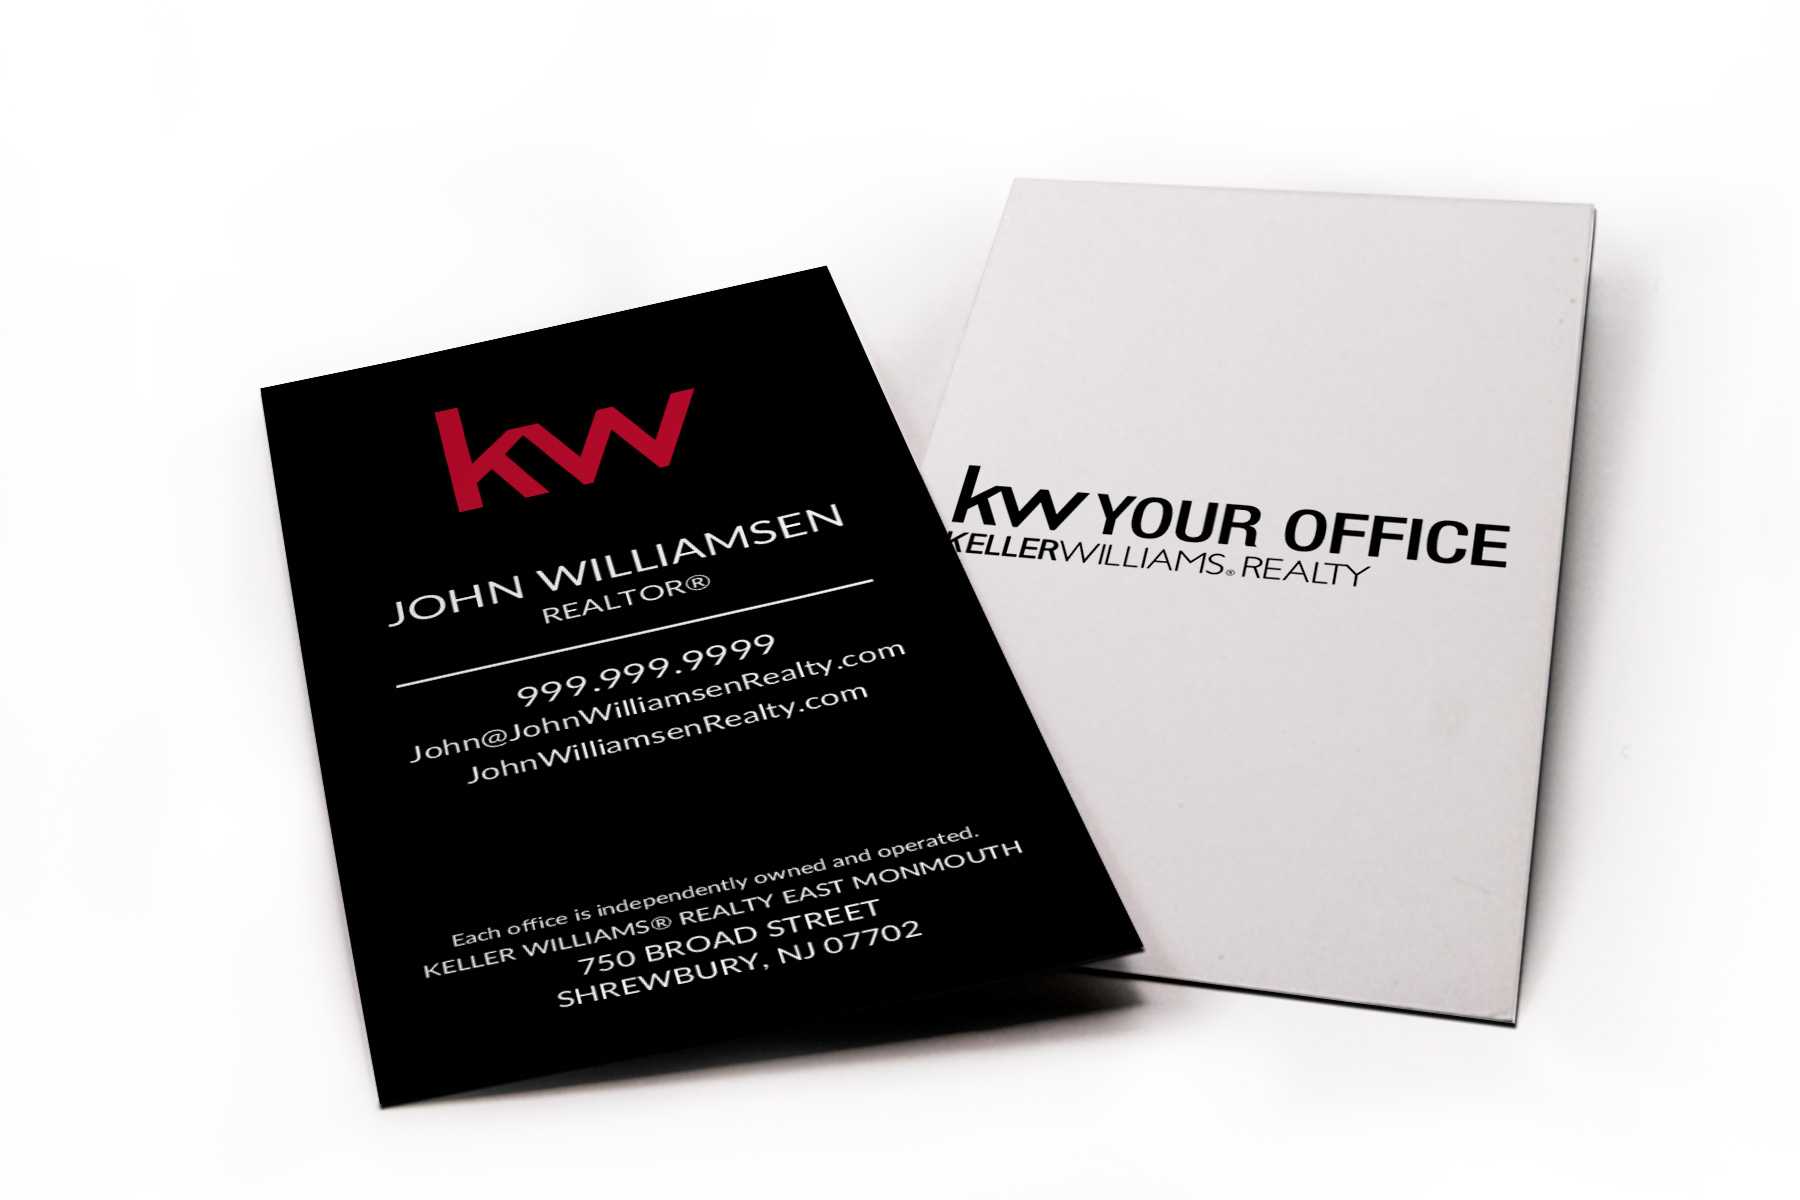 Vertical Black Kw Business Card With Keller Williams Business Card Templates